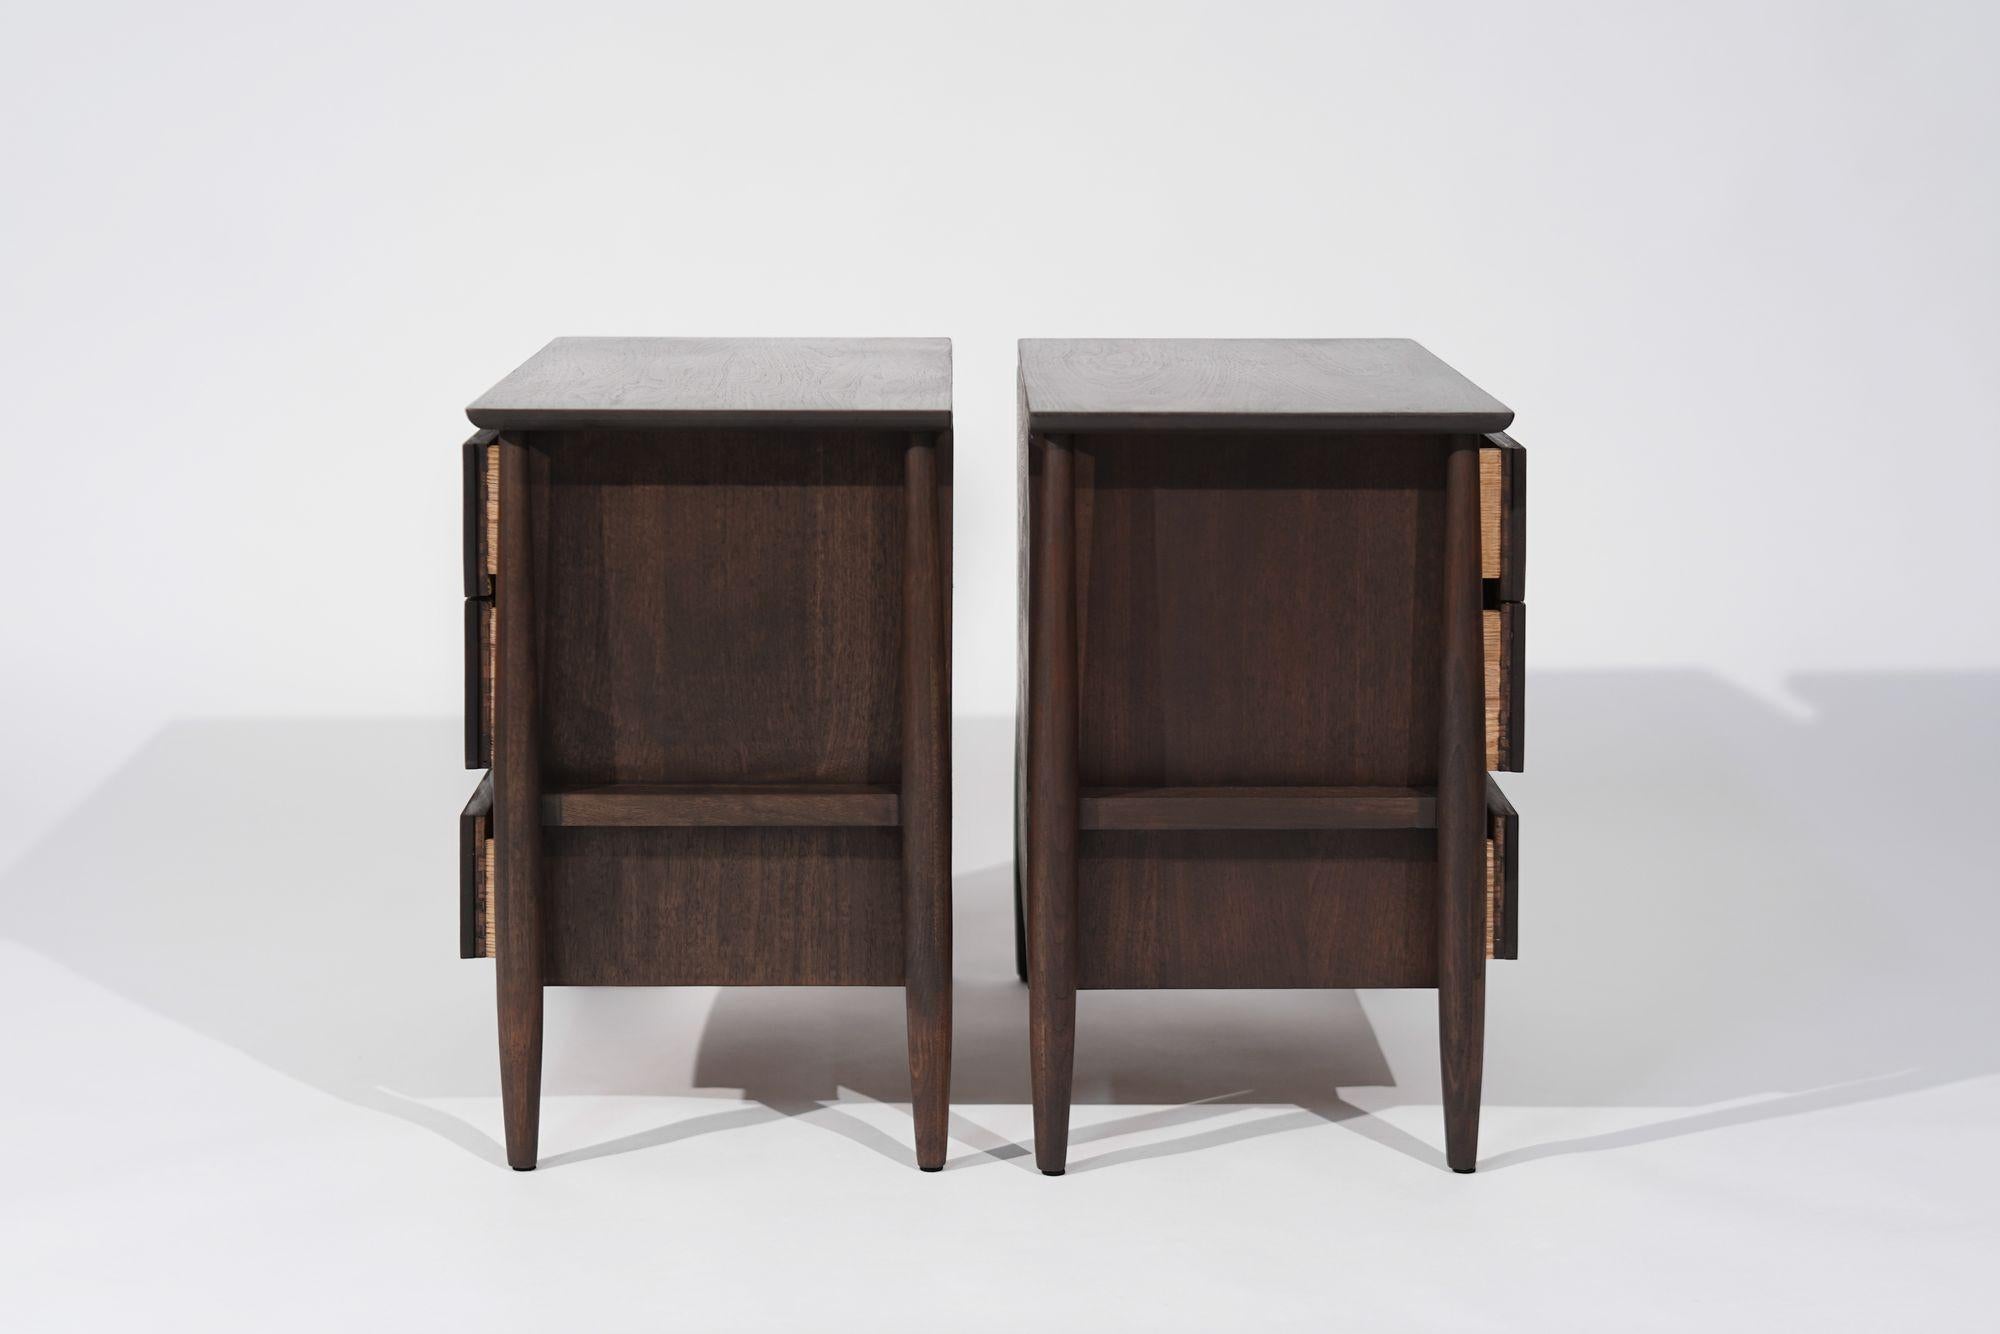 20th Century Exposed Framework Bedside Tables in Walnut by John Stuart, C. 1950s For Sale